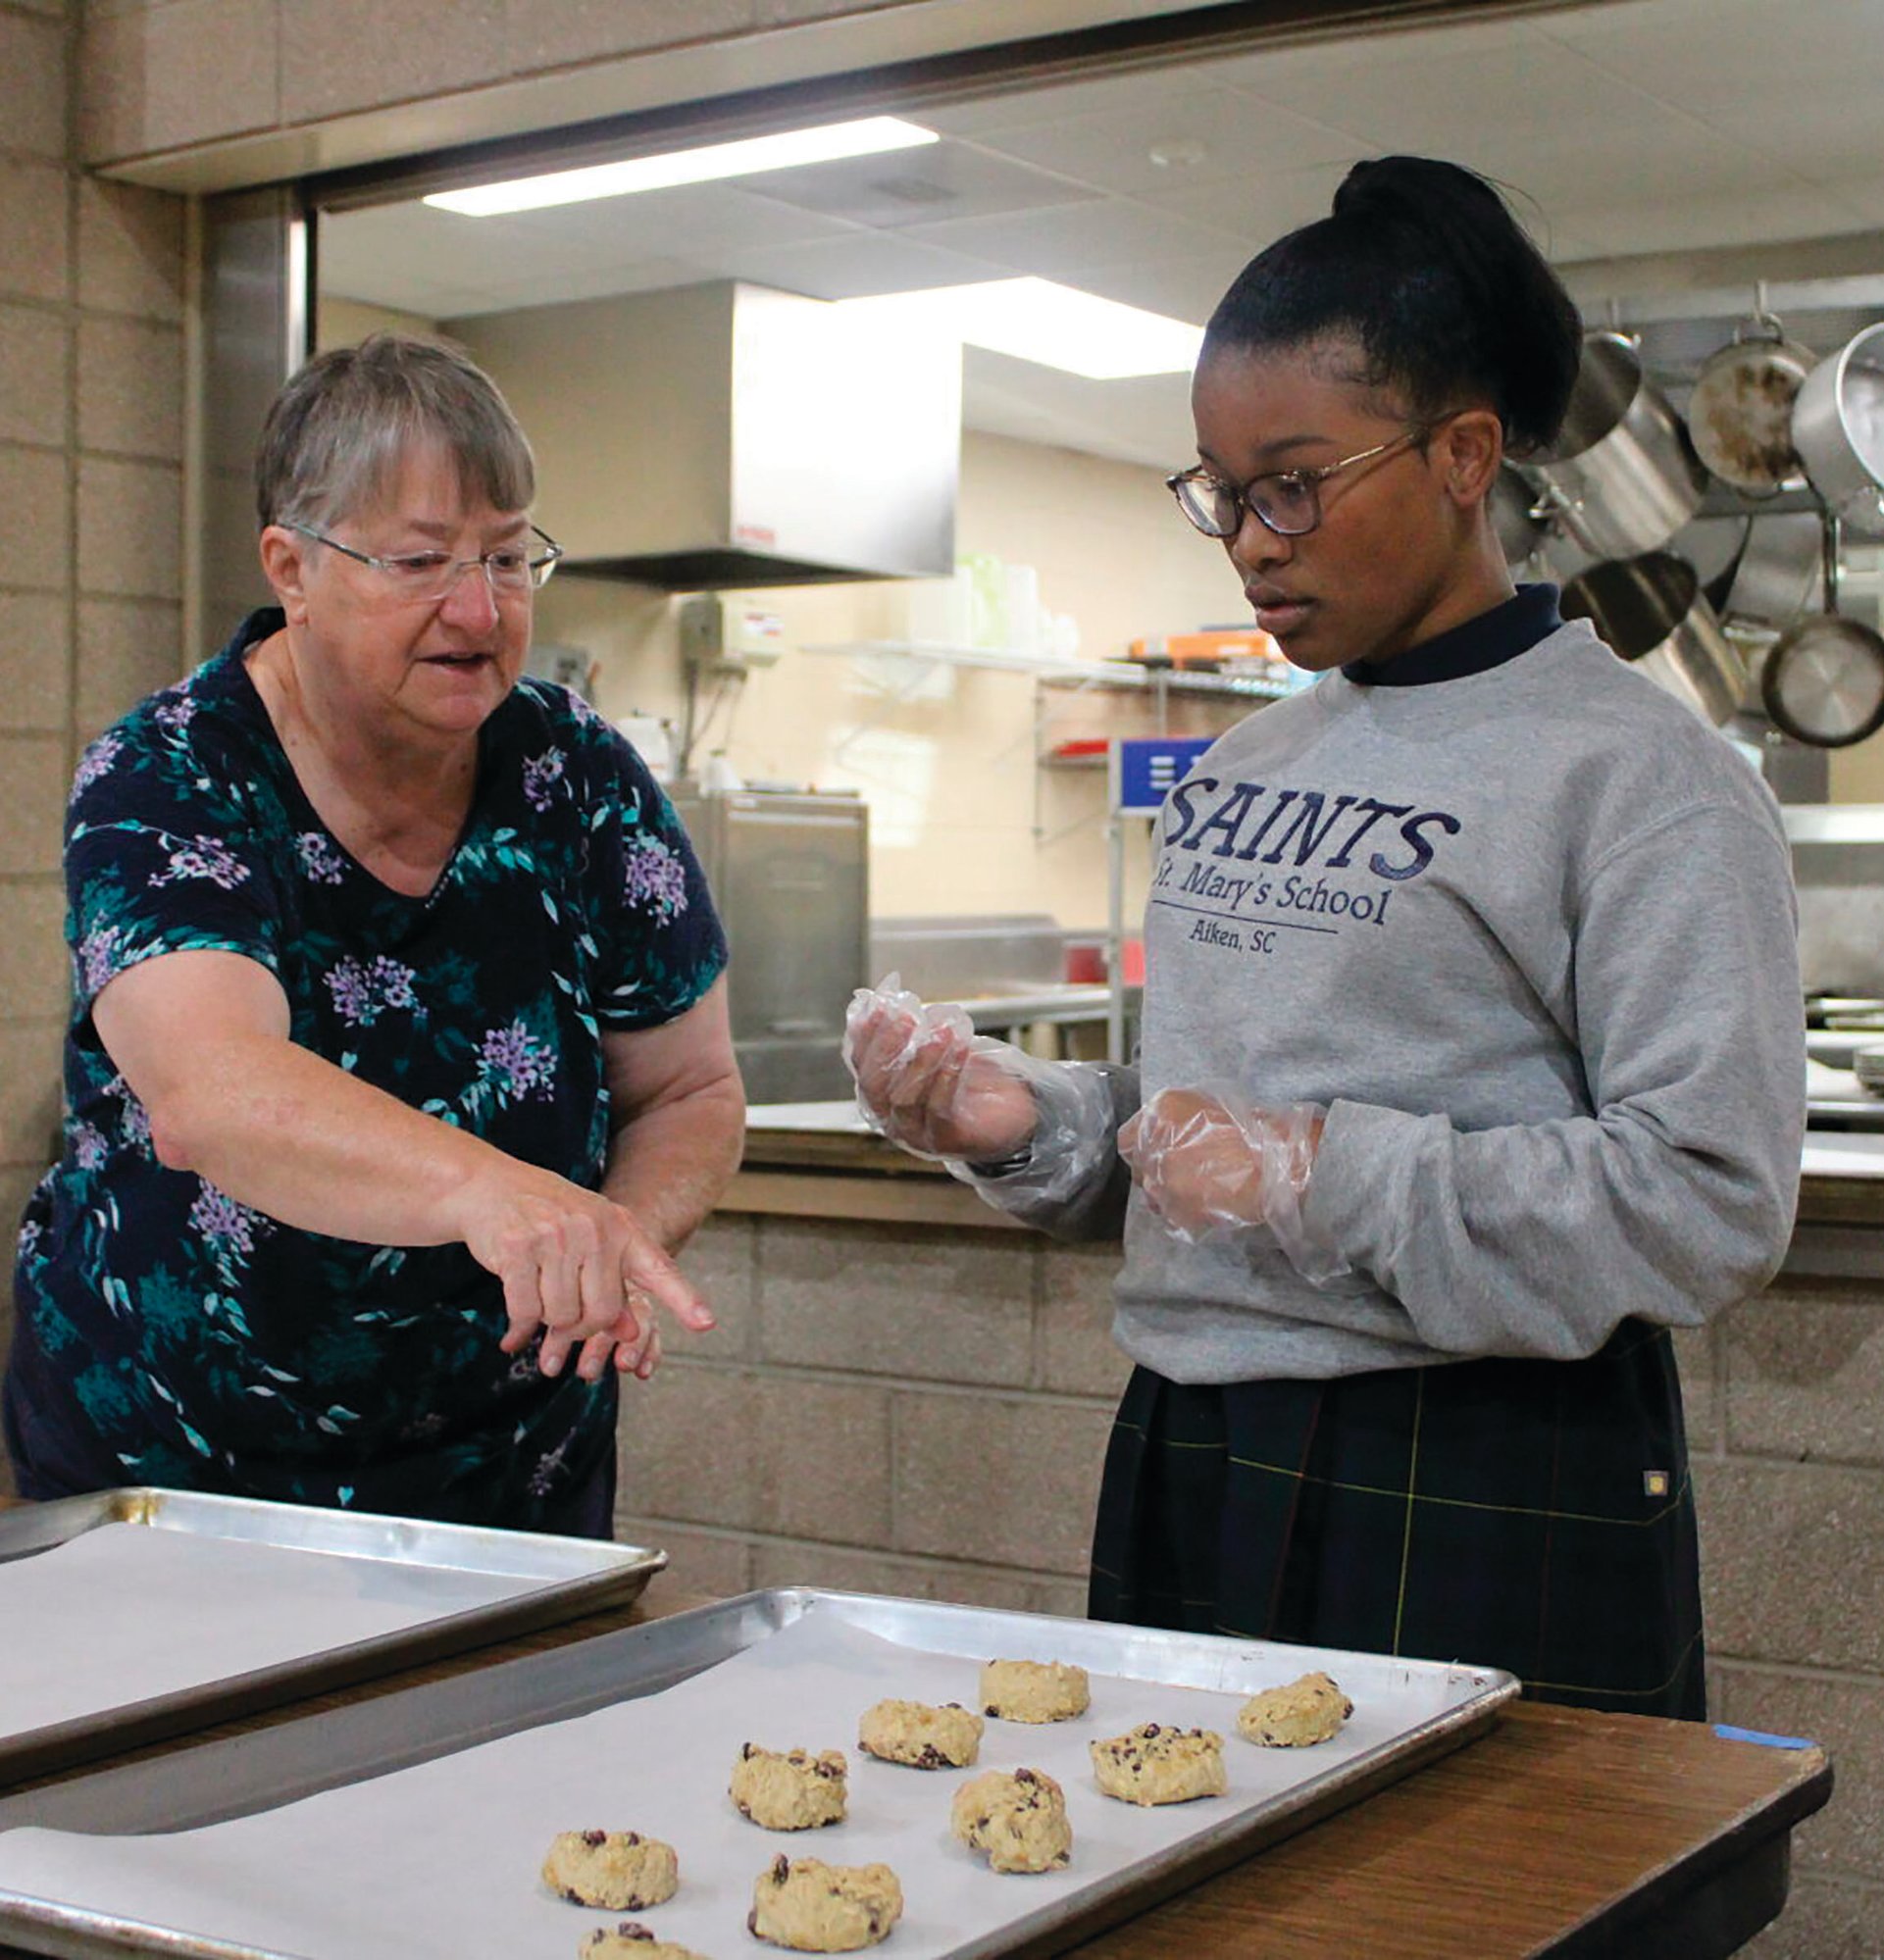 St. Mary Help of Christians youth director Joan LaBone helps sixth-grader Jordon Robinson bake cookies on Oct. 27, 2022 in Aiken, S.C. As a way to teach children the importance of giving back, students at St. Mary Help of Christians Catholic School recently baked cookies for men who are prisoners at Broad River Correctional Institution located outside of Columbia.